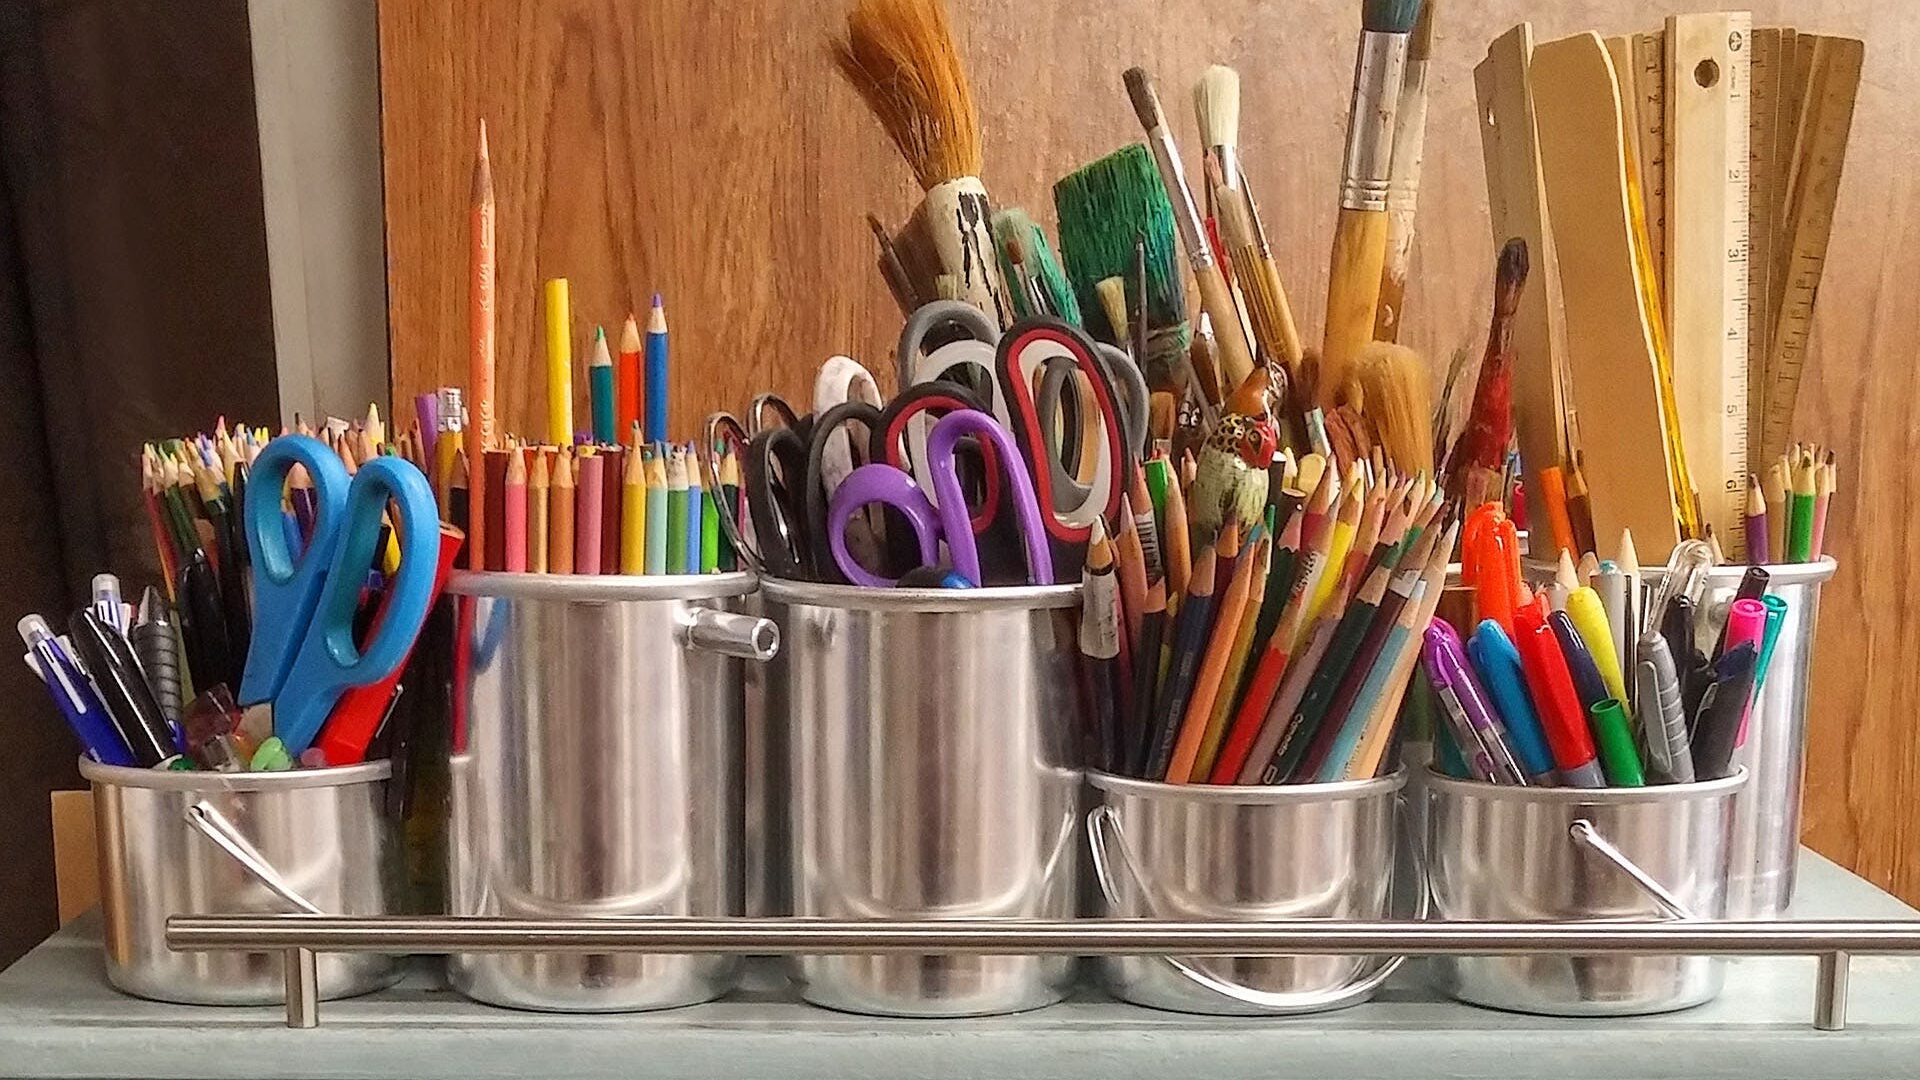 Image of scissors and pencils in silver pots.